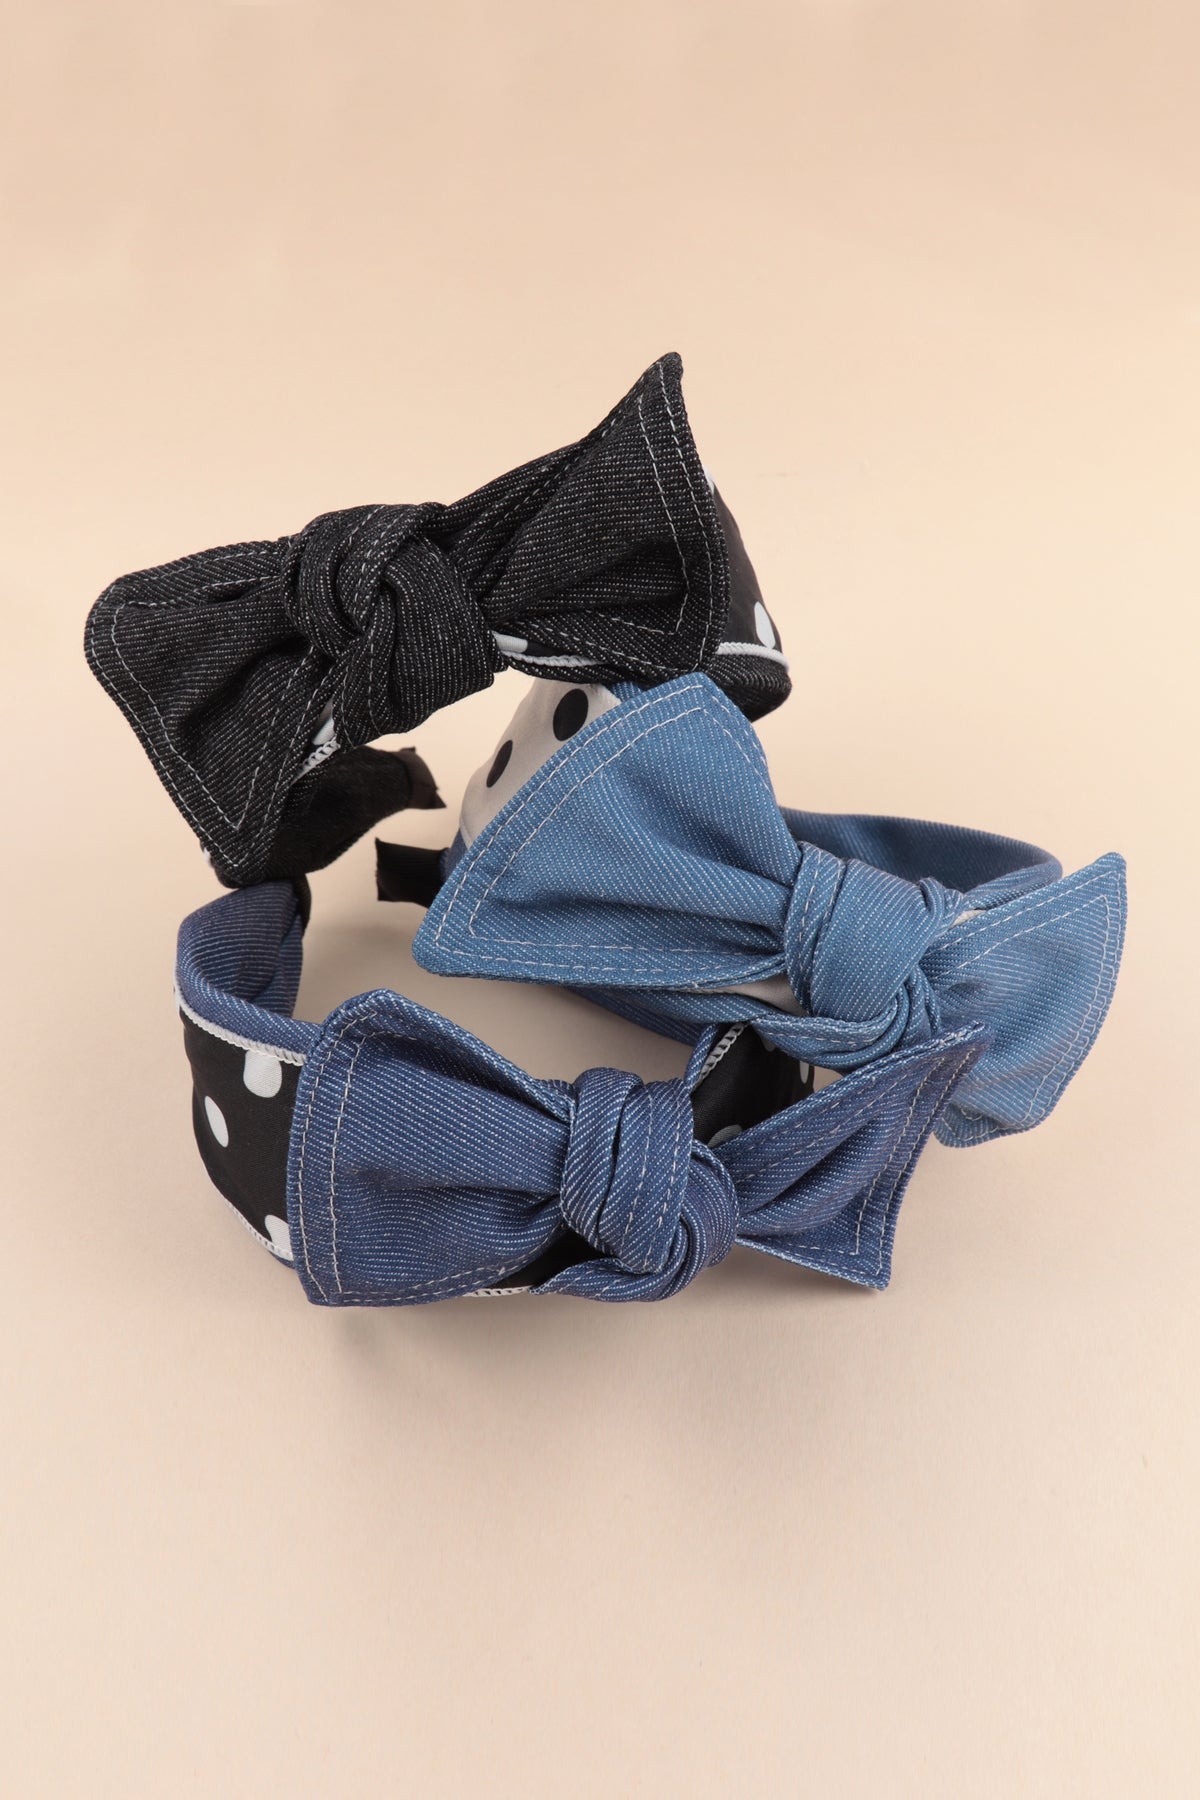 DENIM POLKA DOT PRINT KNOTTED RIBBON HEADBAND HAIR ACCESSORIES/6PCS (NOW $1.00 ONLY!)